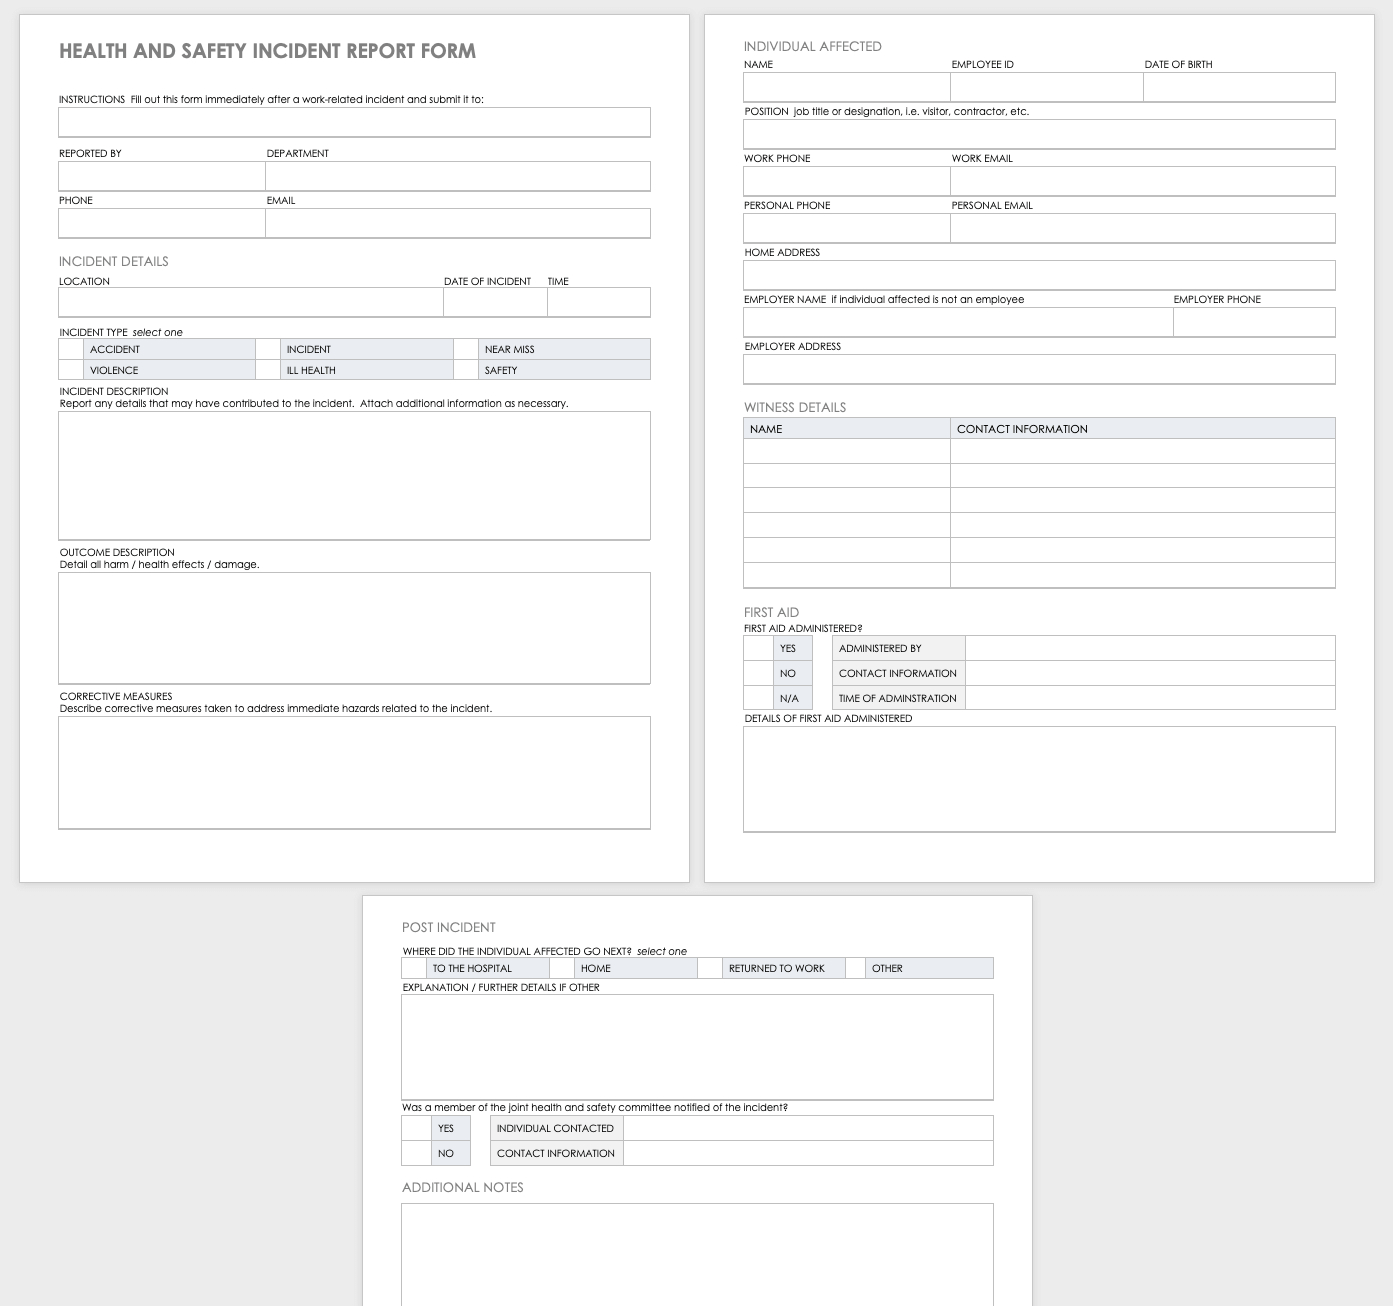 Free Workplace Accident Report Templates | Smartsheet Inside Health And Safety Incident Report Form Template